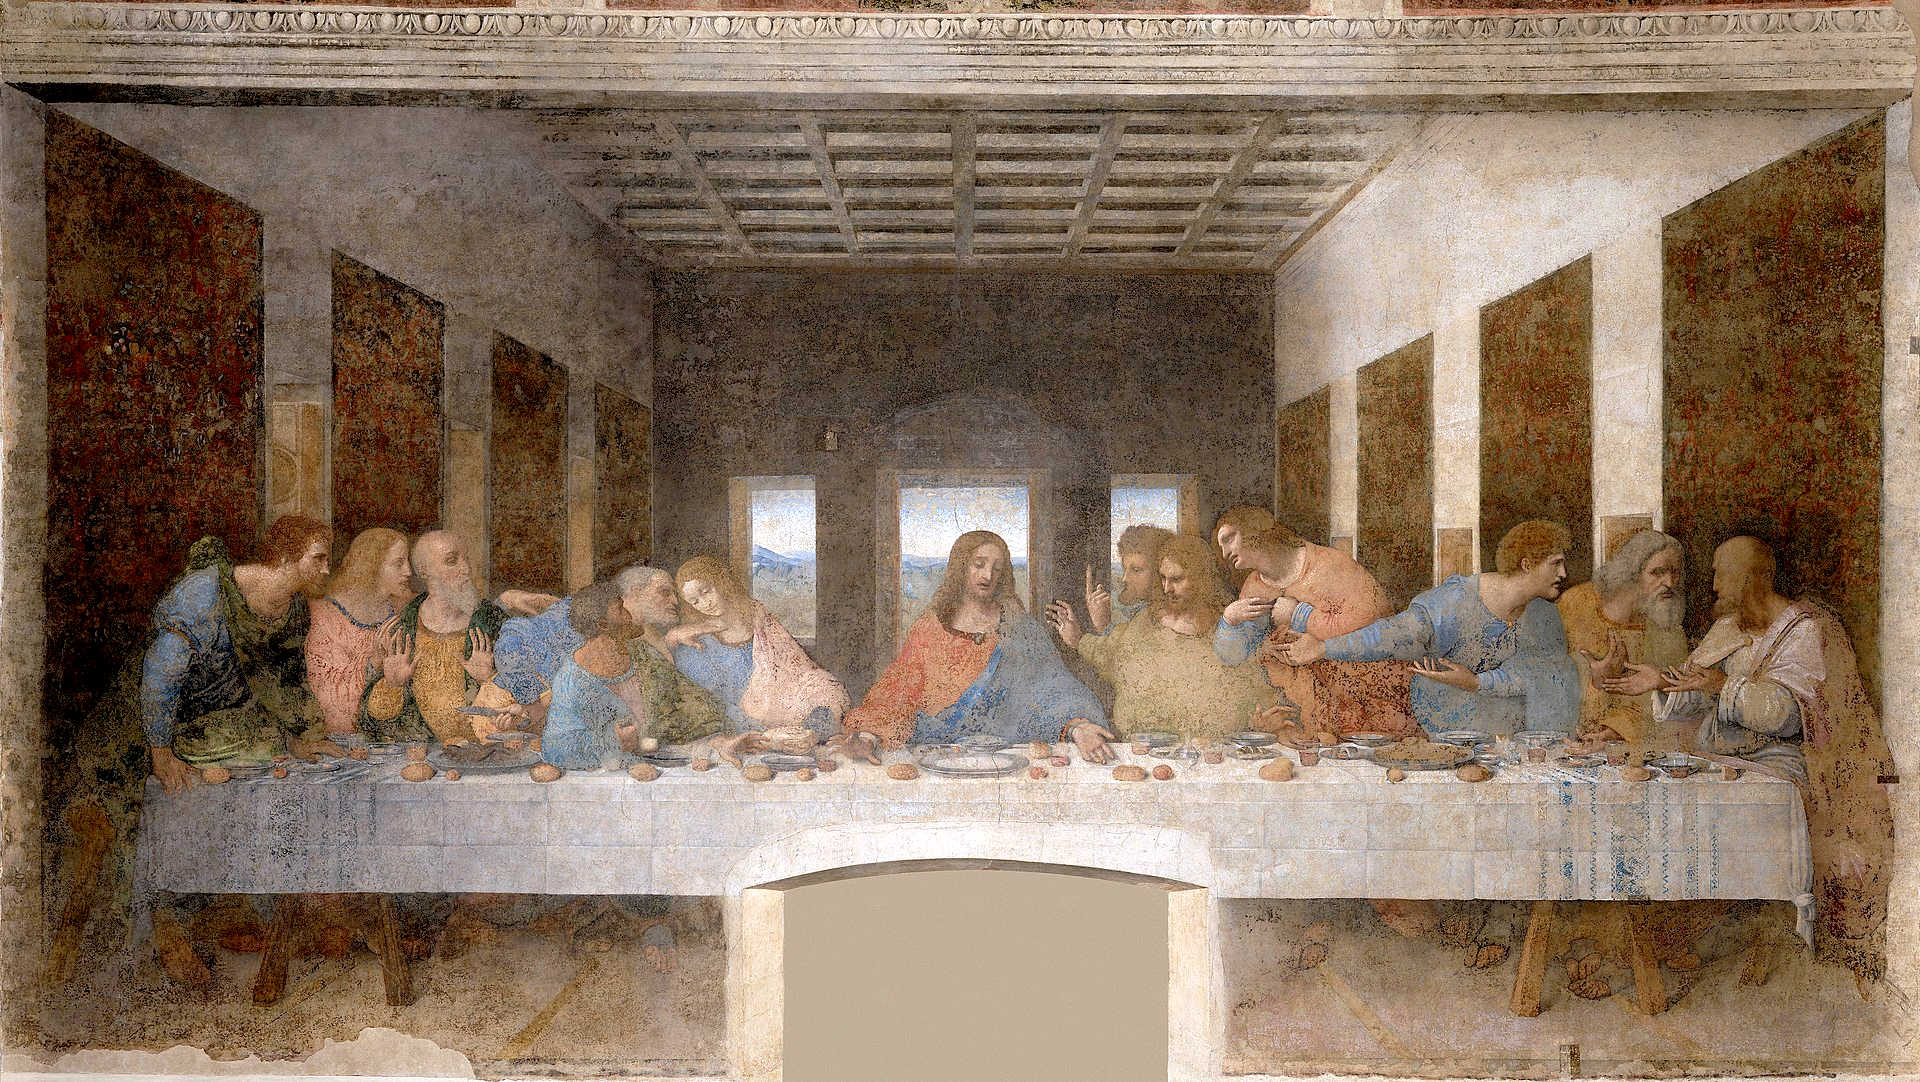 The Last Supper, Jesus Christ and his Apostles